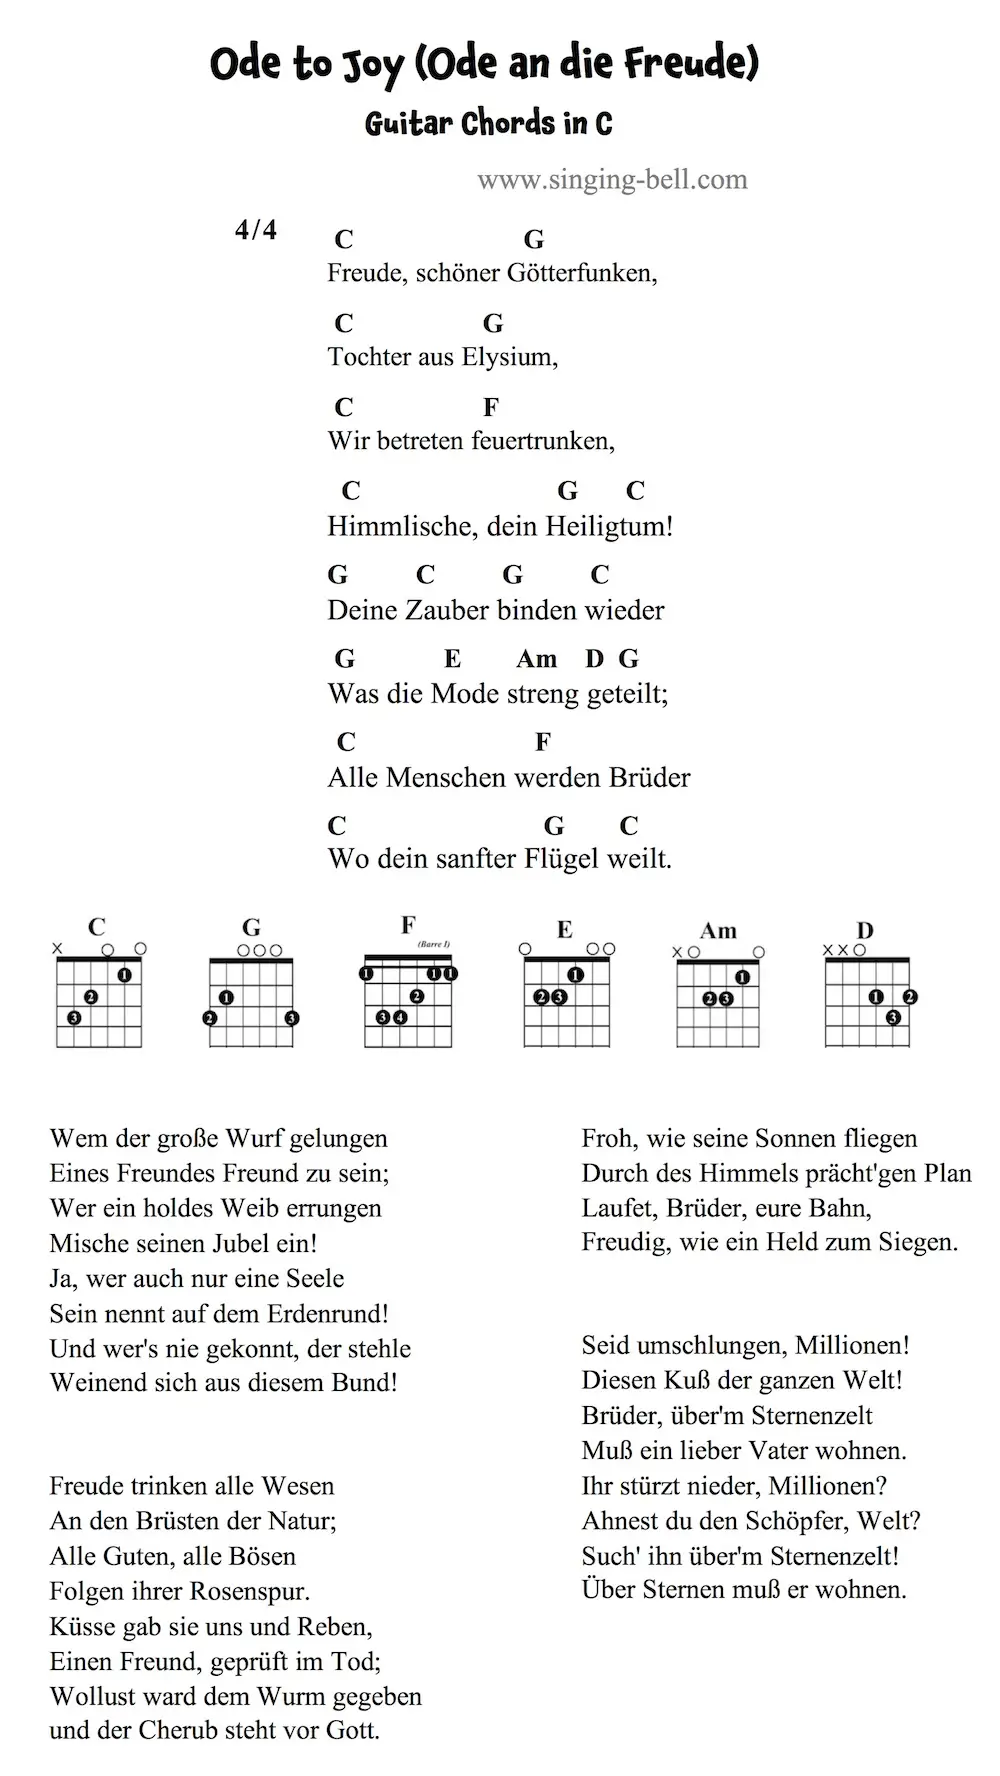 Ode to Joy (Ode an die Freude) Guitar Chords and Tabs in C major.